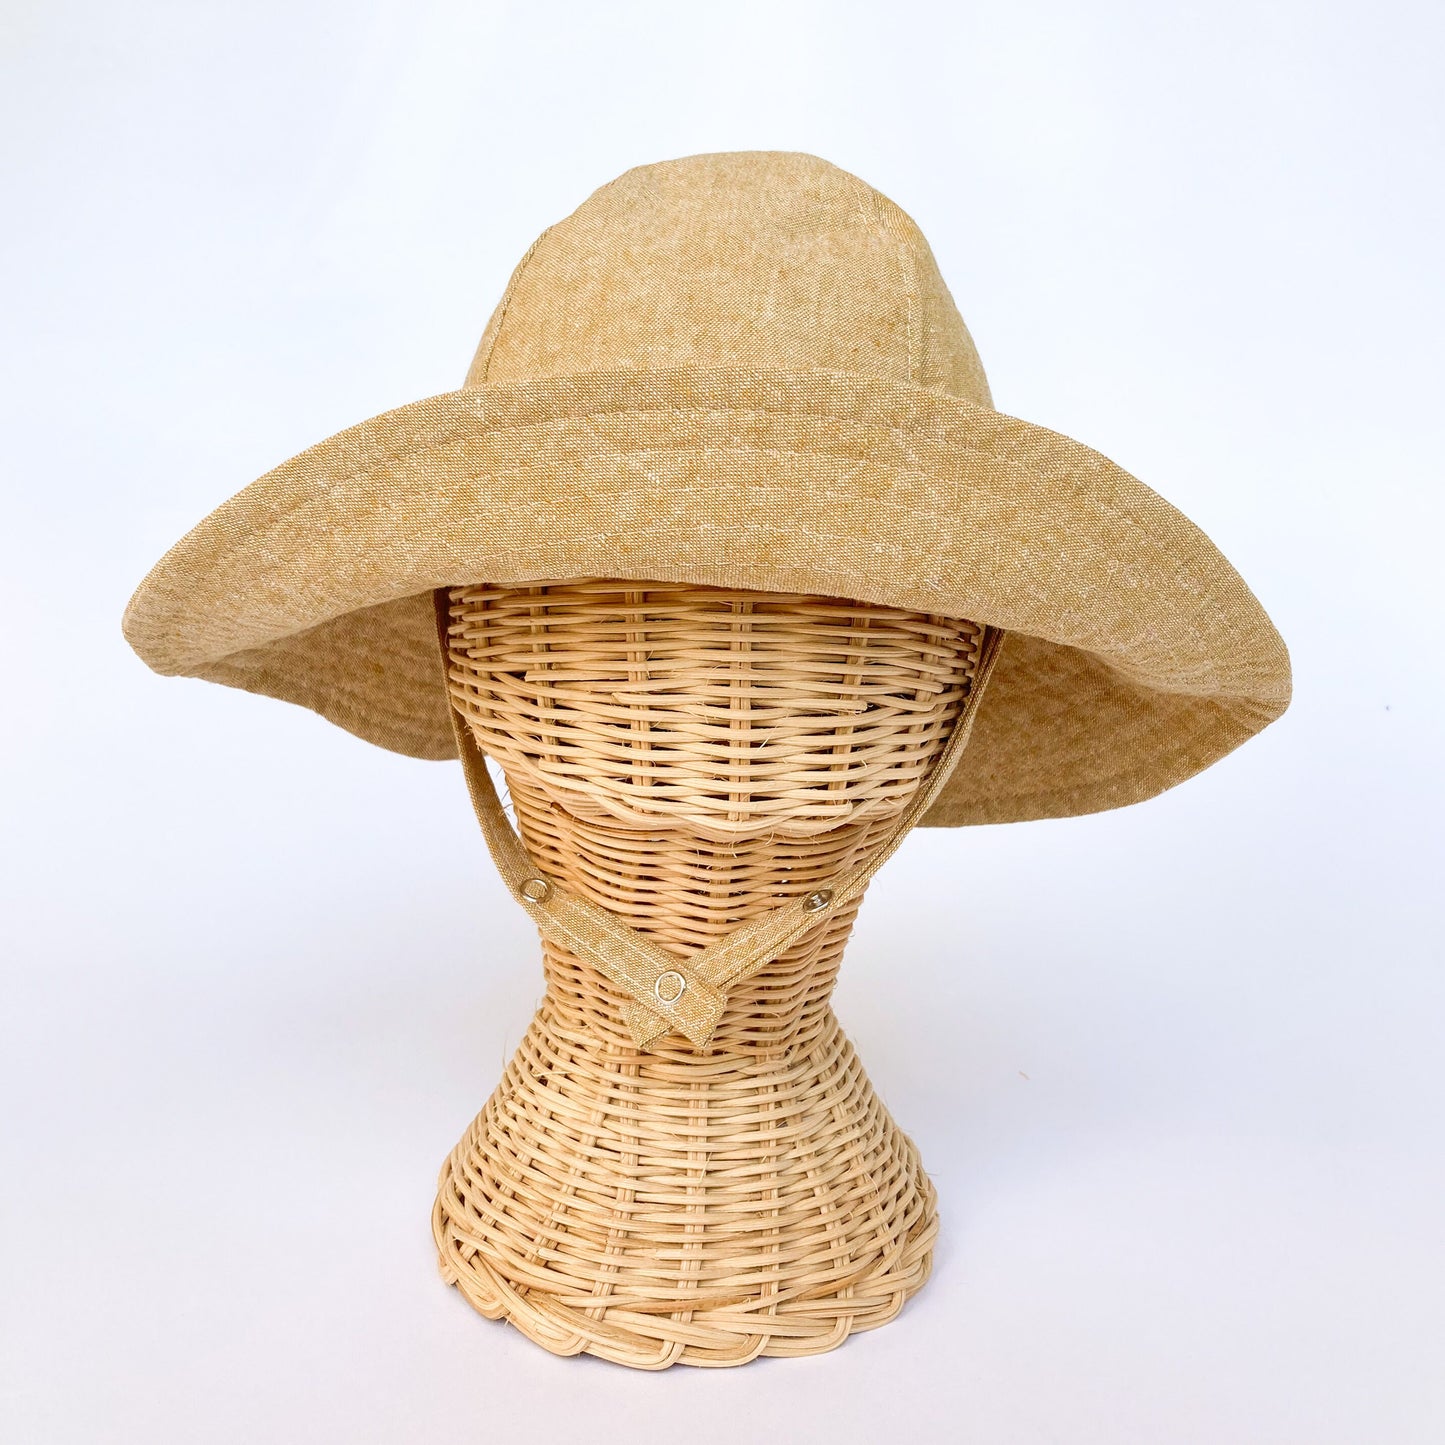 Baby Wide Brim Sun Hat, Tan Hat, Outdoor Toddler Hat, Beach Hat for Kids, Baby Summer Hat, Infant Sun Protection, Neutral Baby Shower Gift